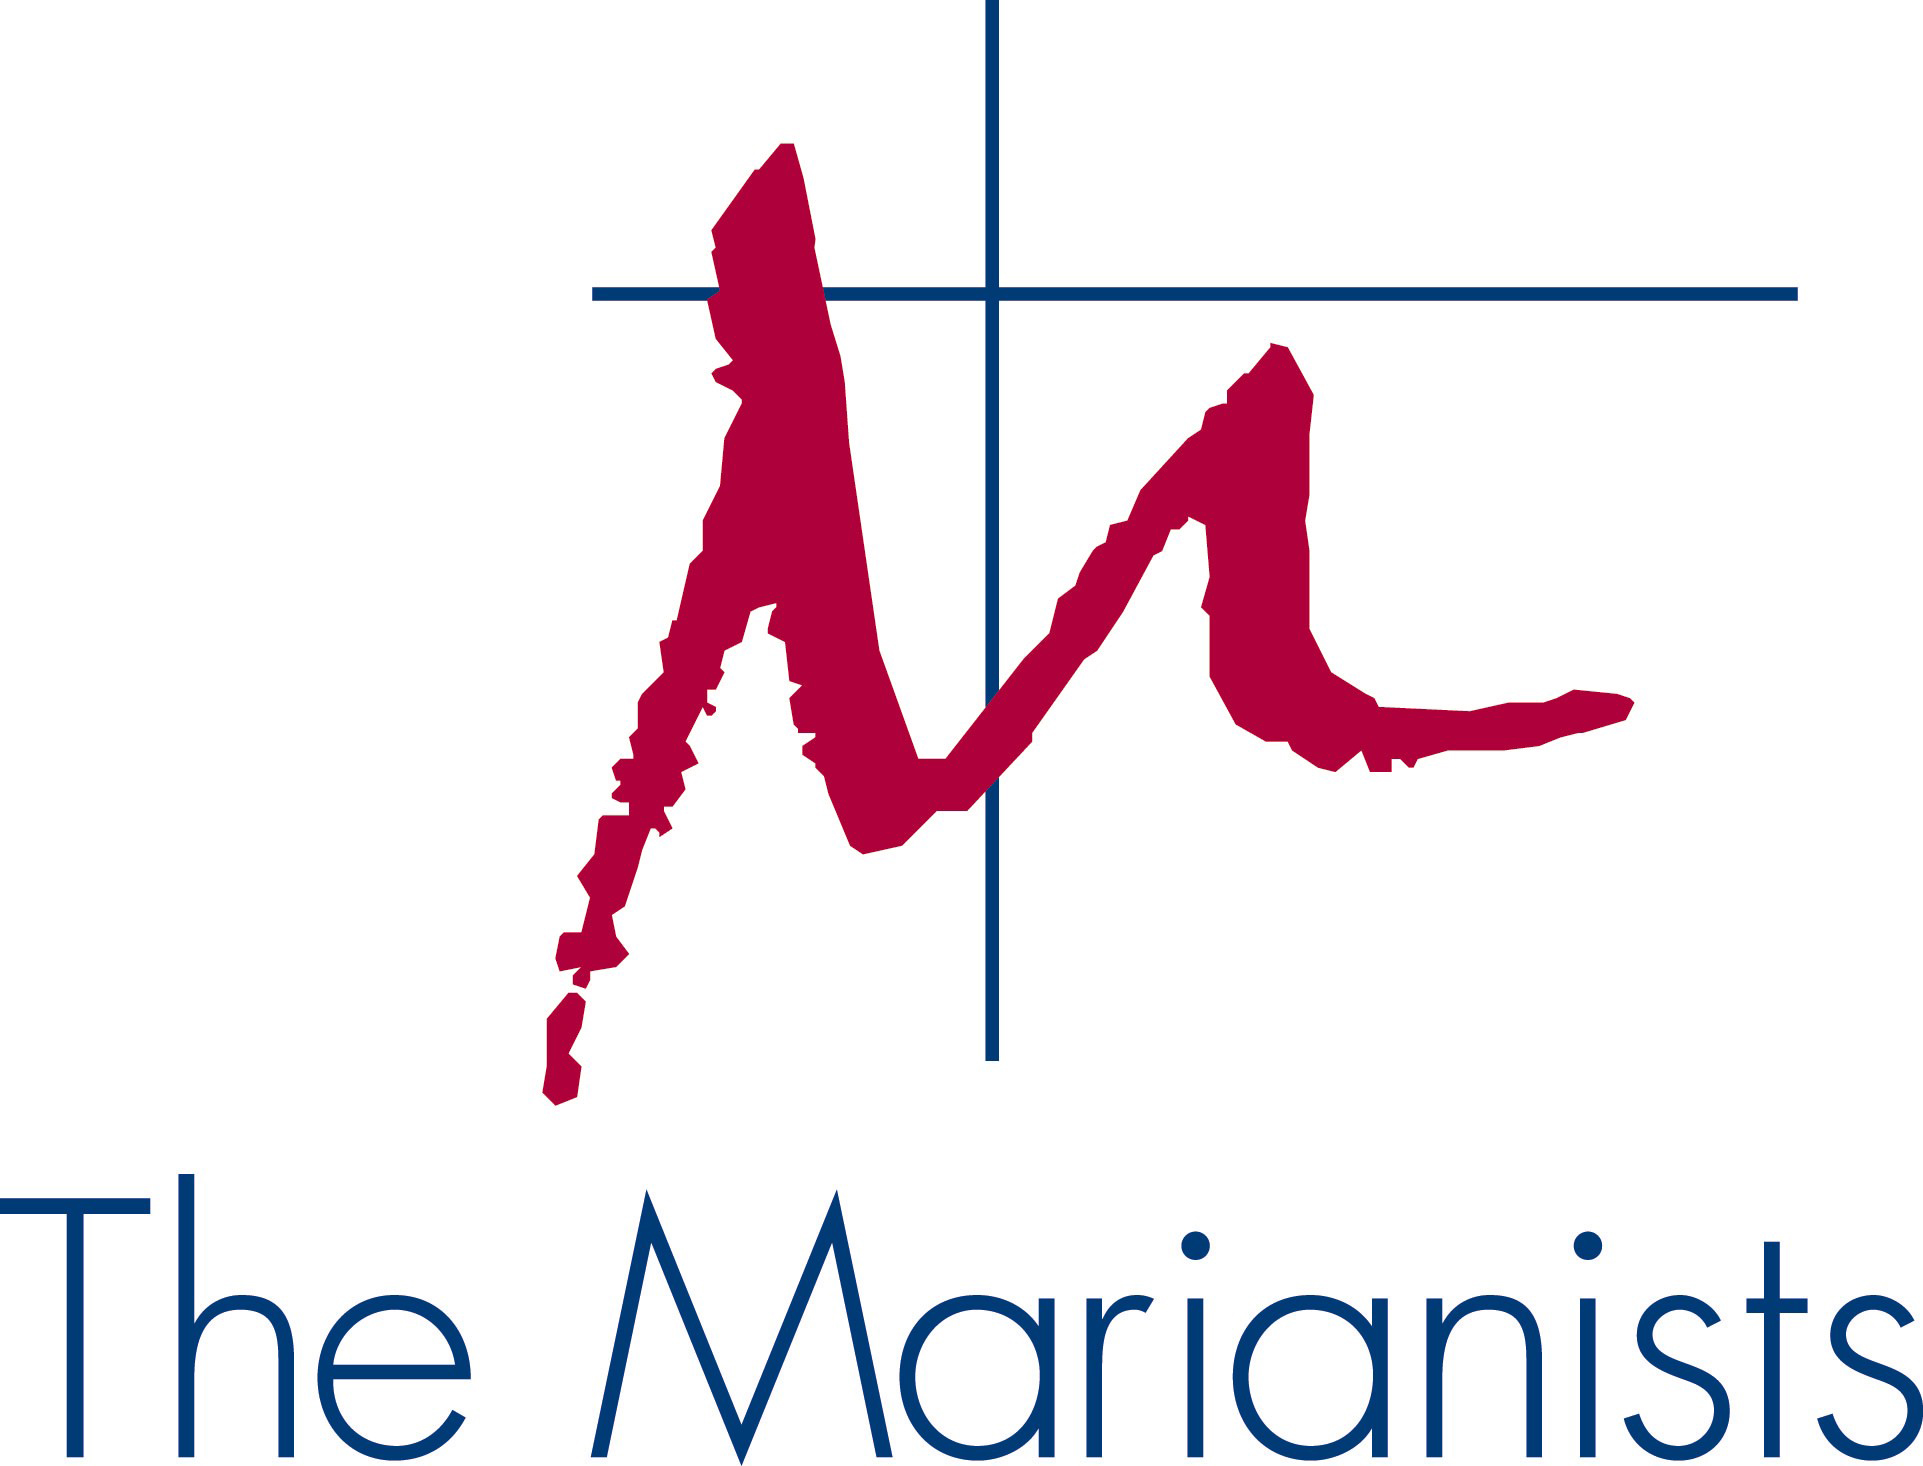 The Marianists